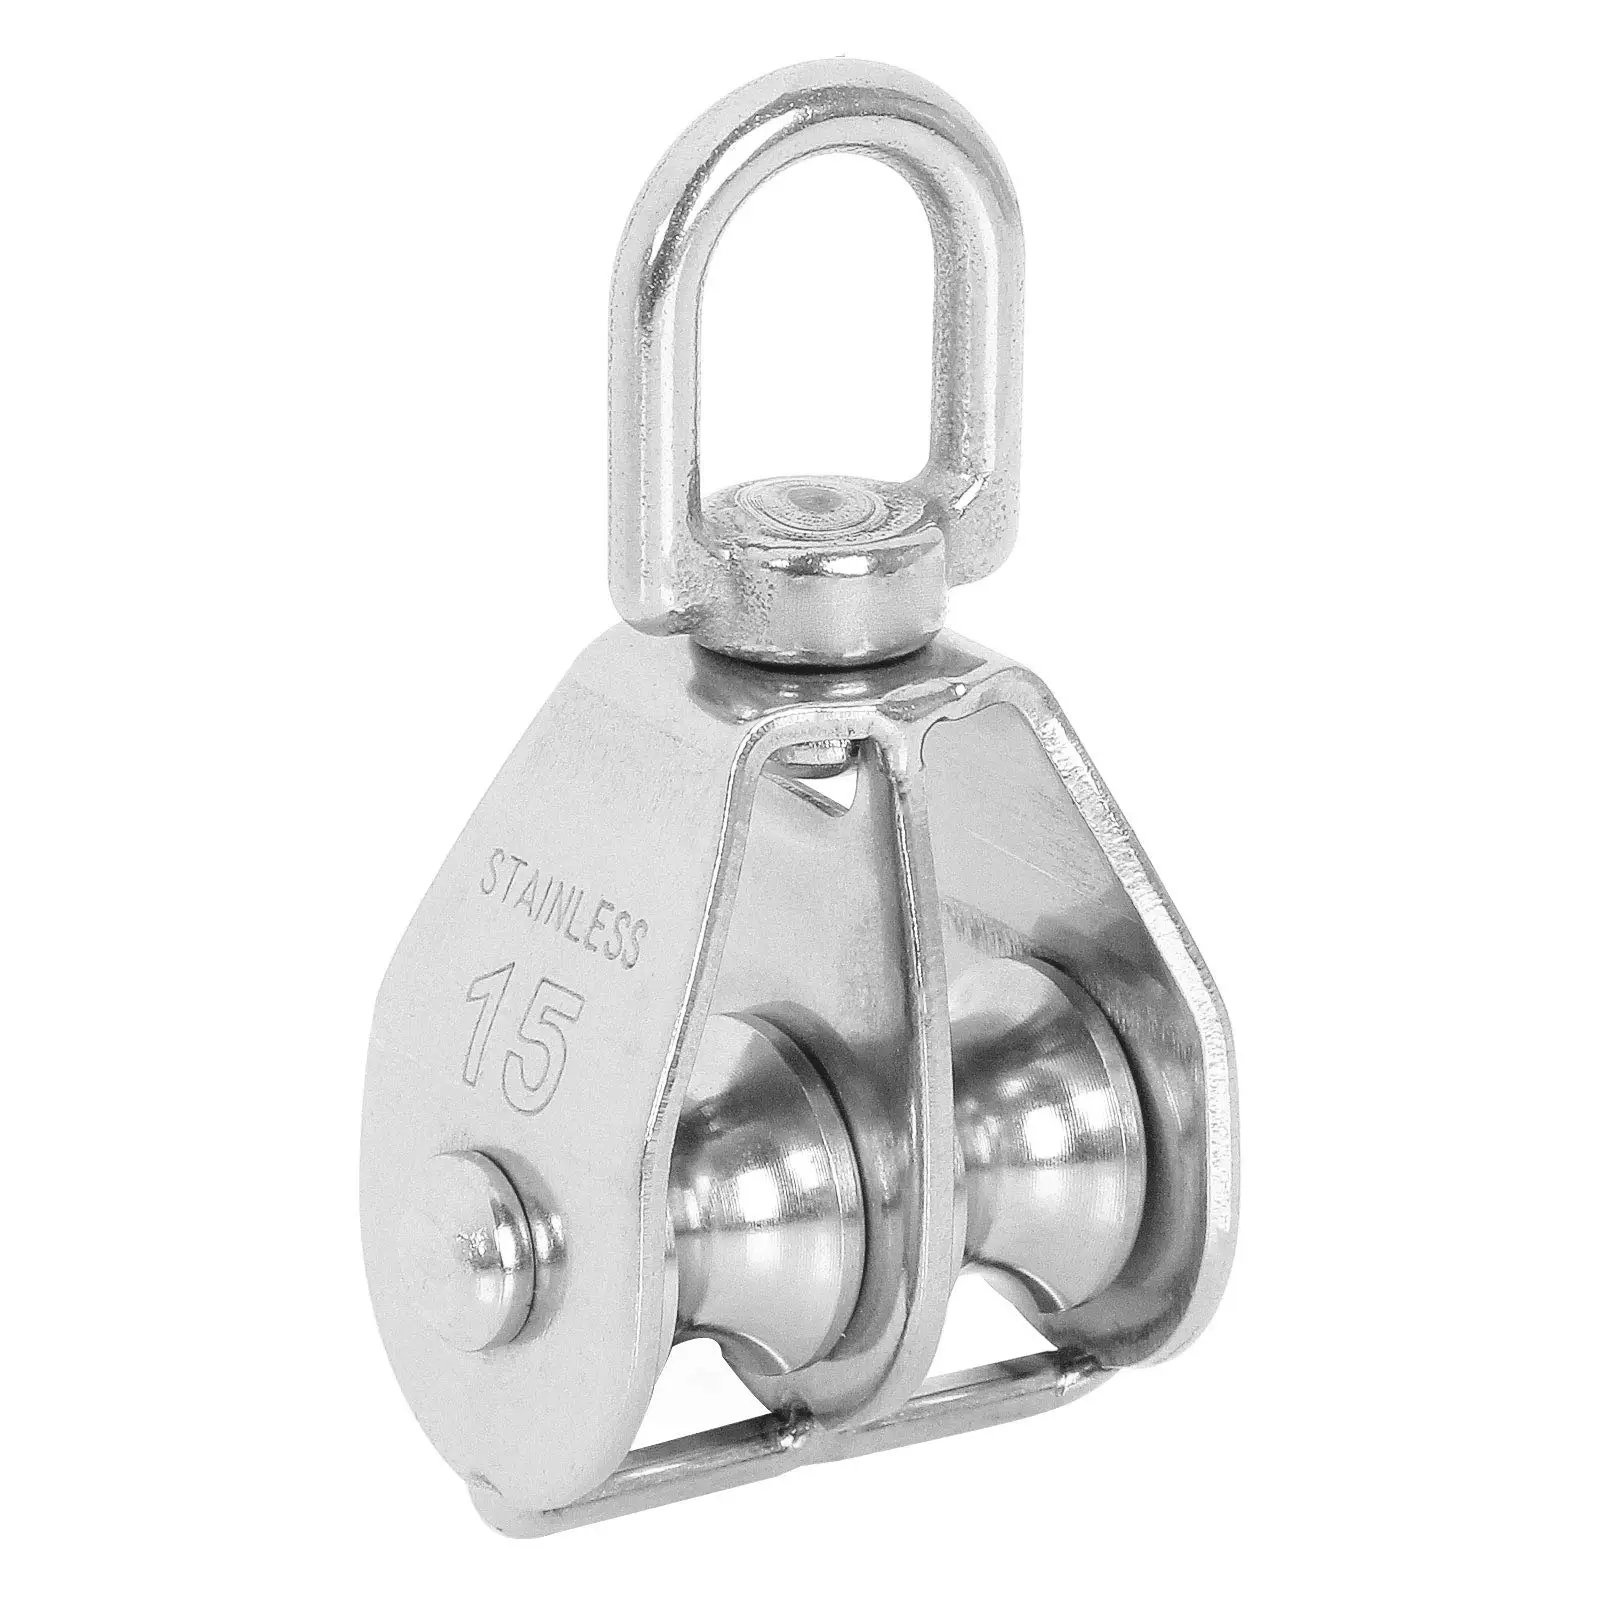 Double Pulley Block Hanging Wire Pulley Roller 304 Stainless Steel Heavy Duty Double Wheel Block Pulley for Lifting Rope (M15)